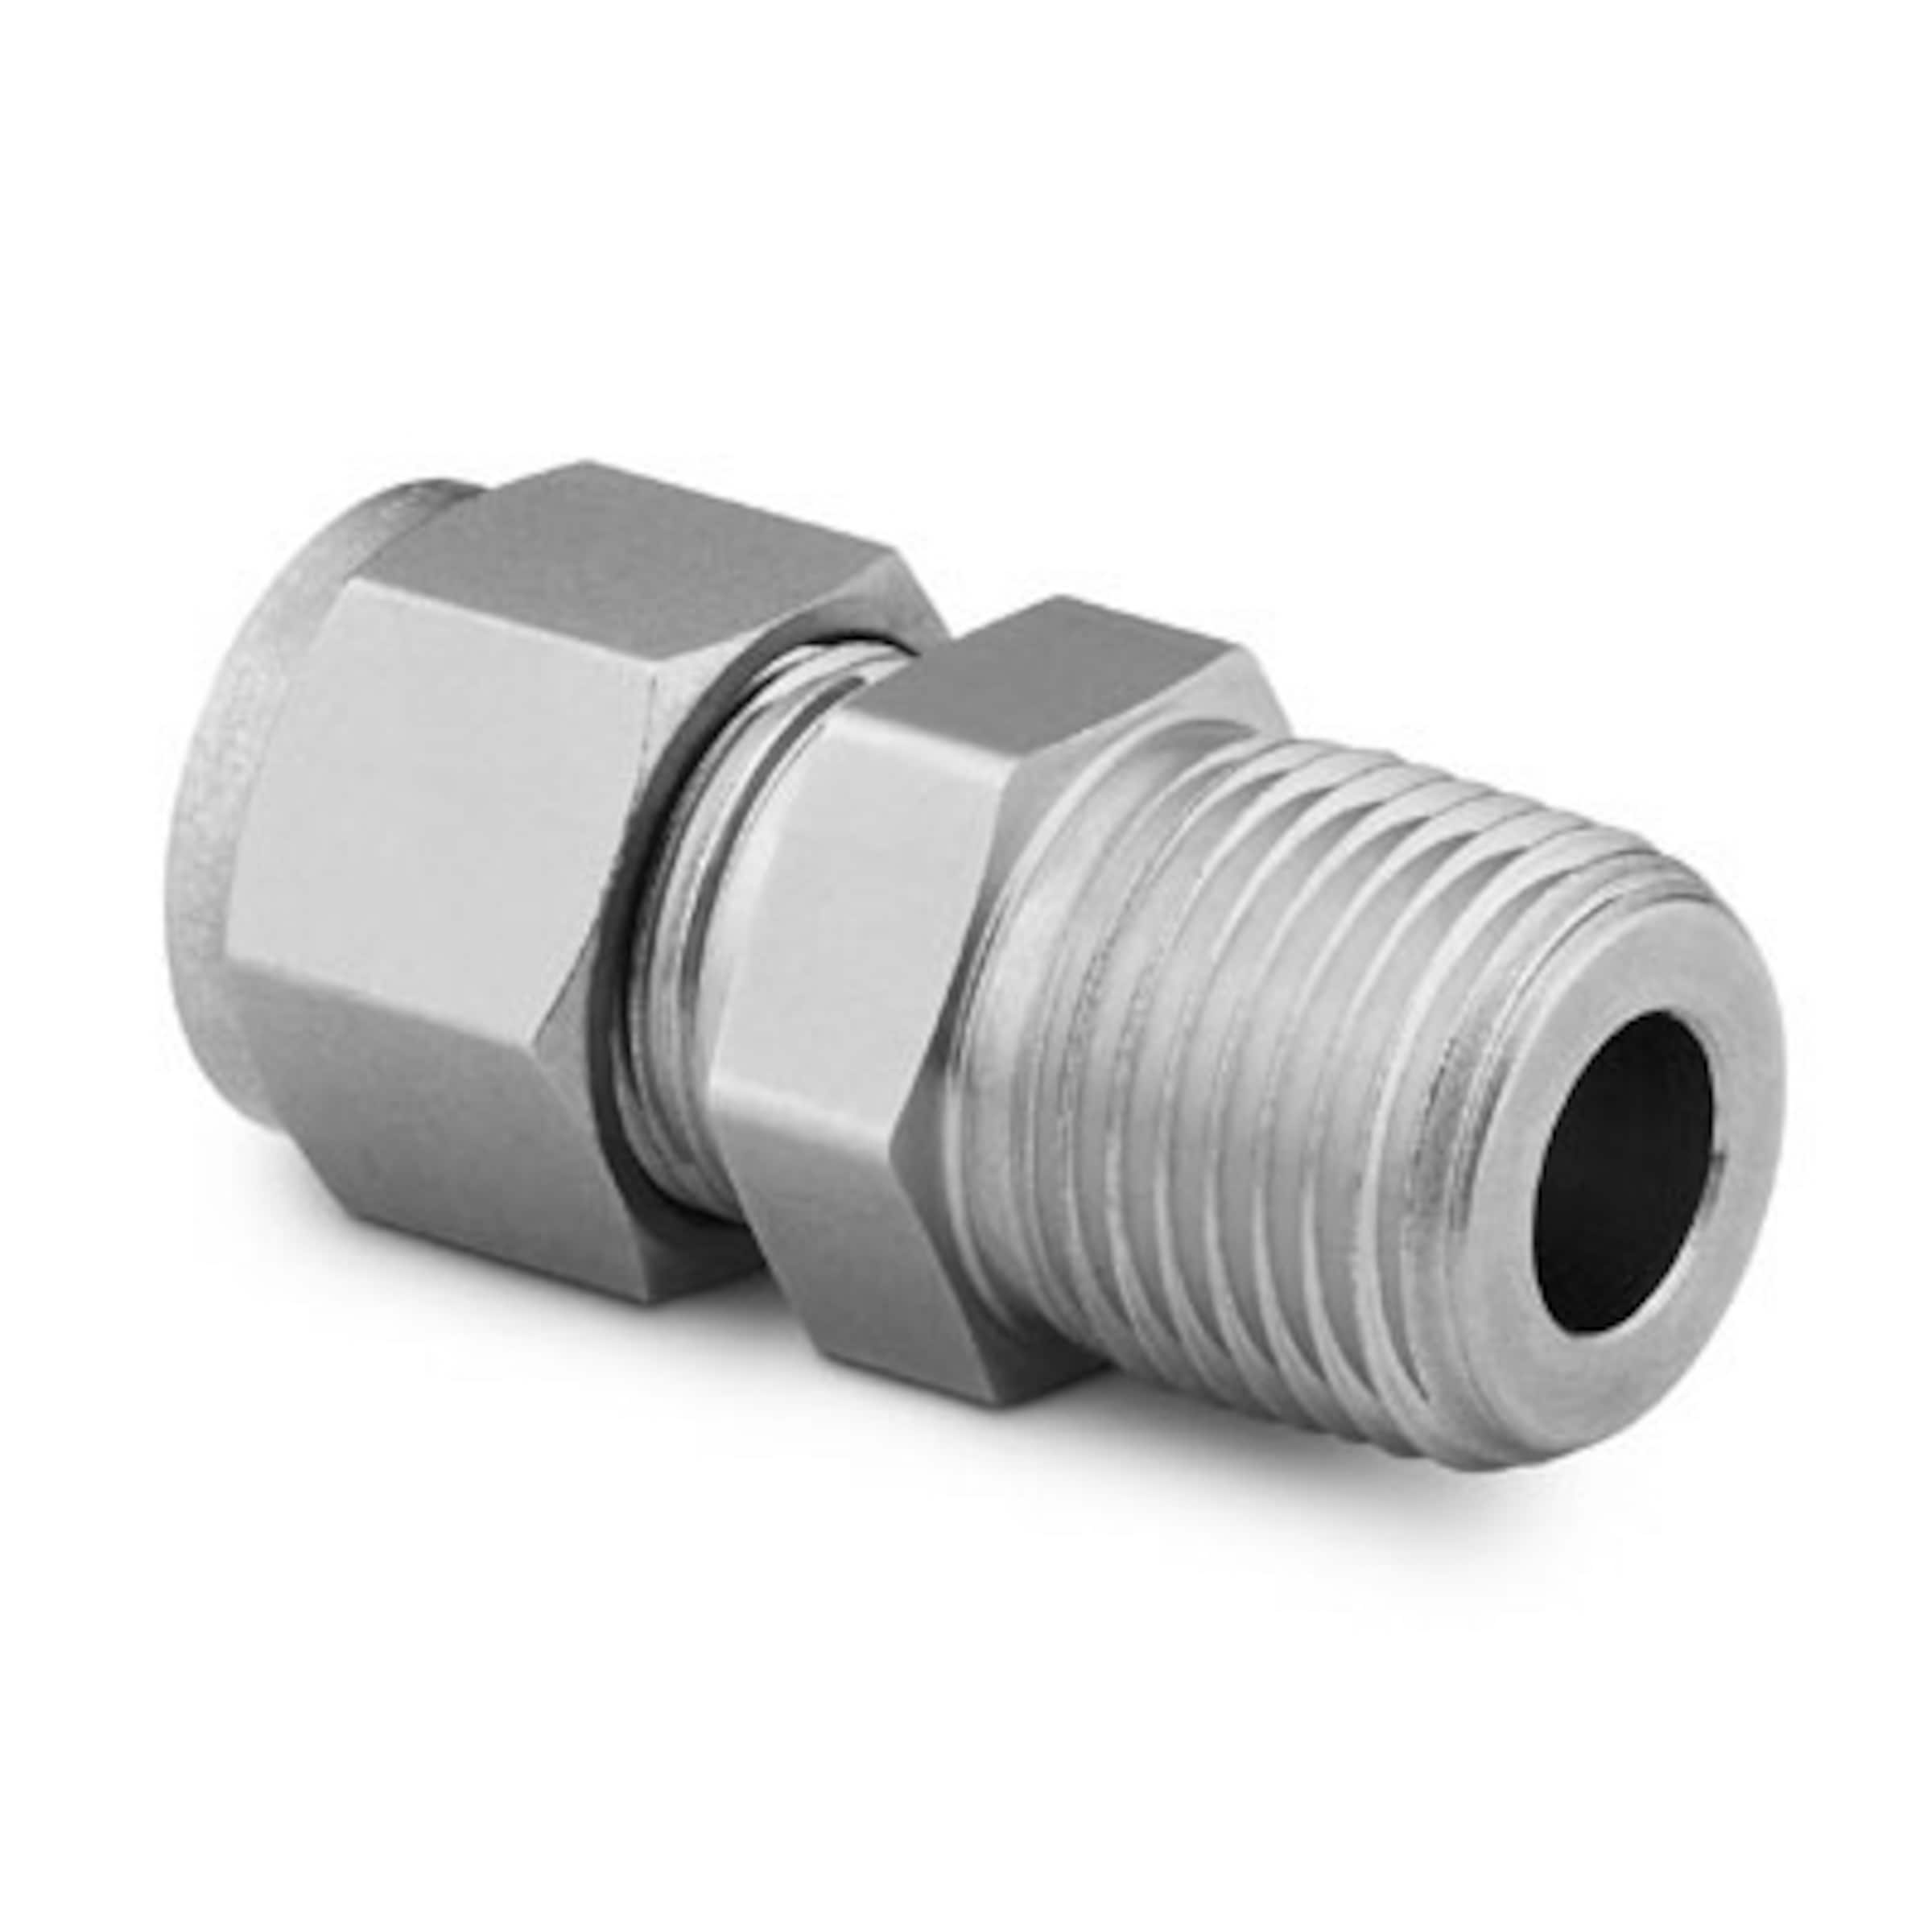 1/8" 1/4" 3/8" Stainless Male To Male BSP Coupler Brass Fitting Adapter M-M ST